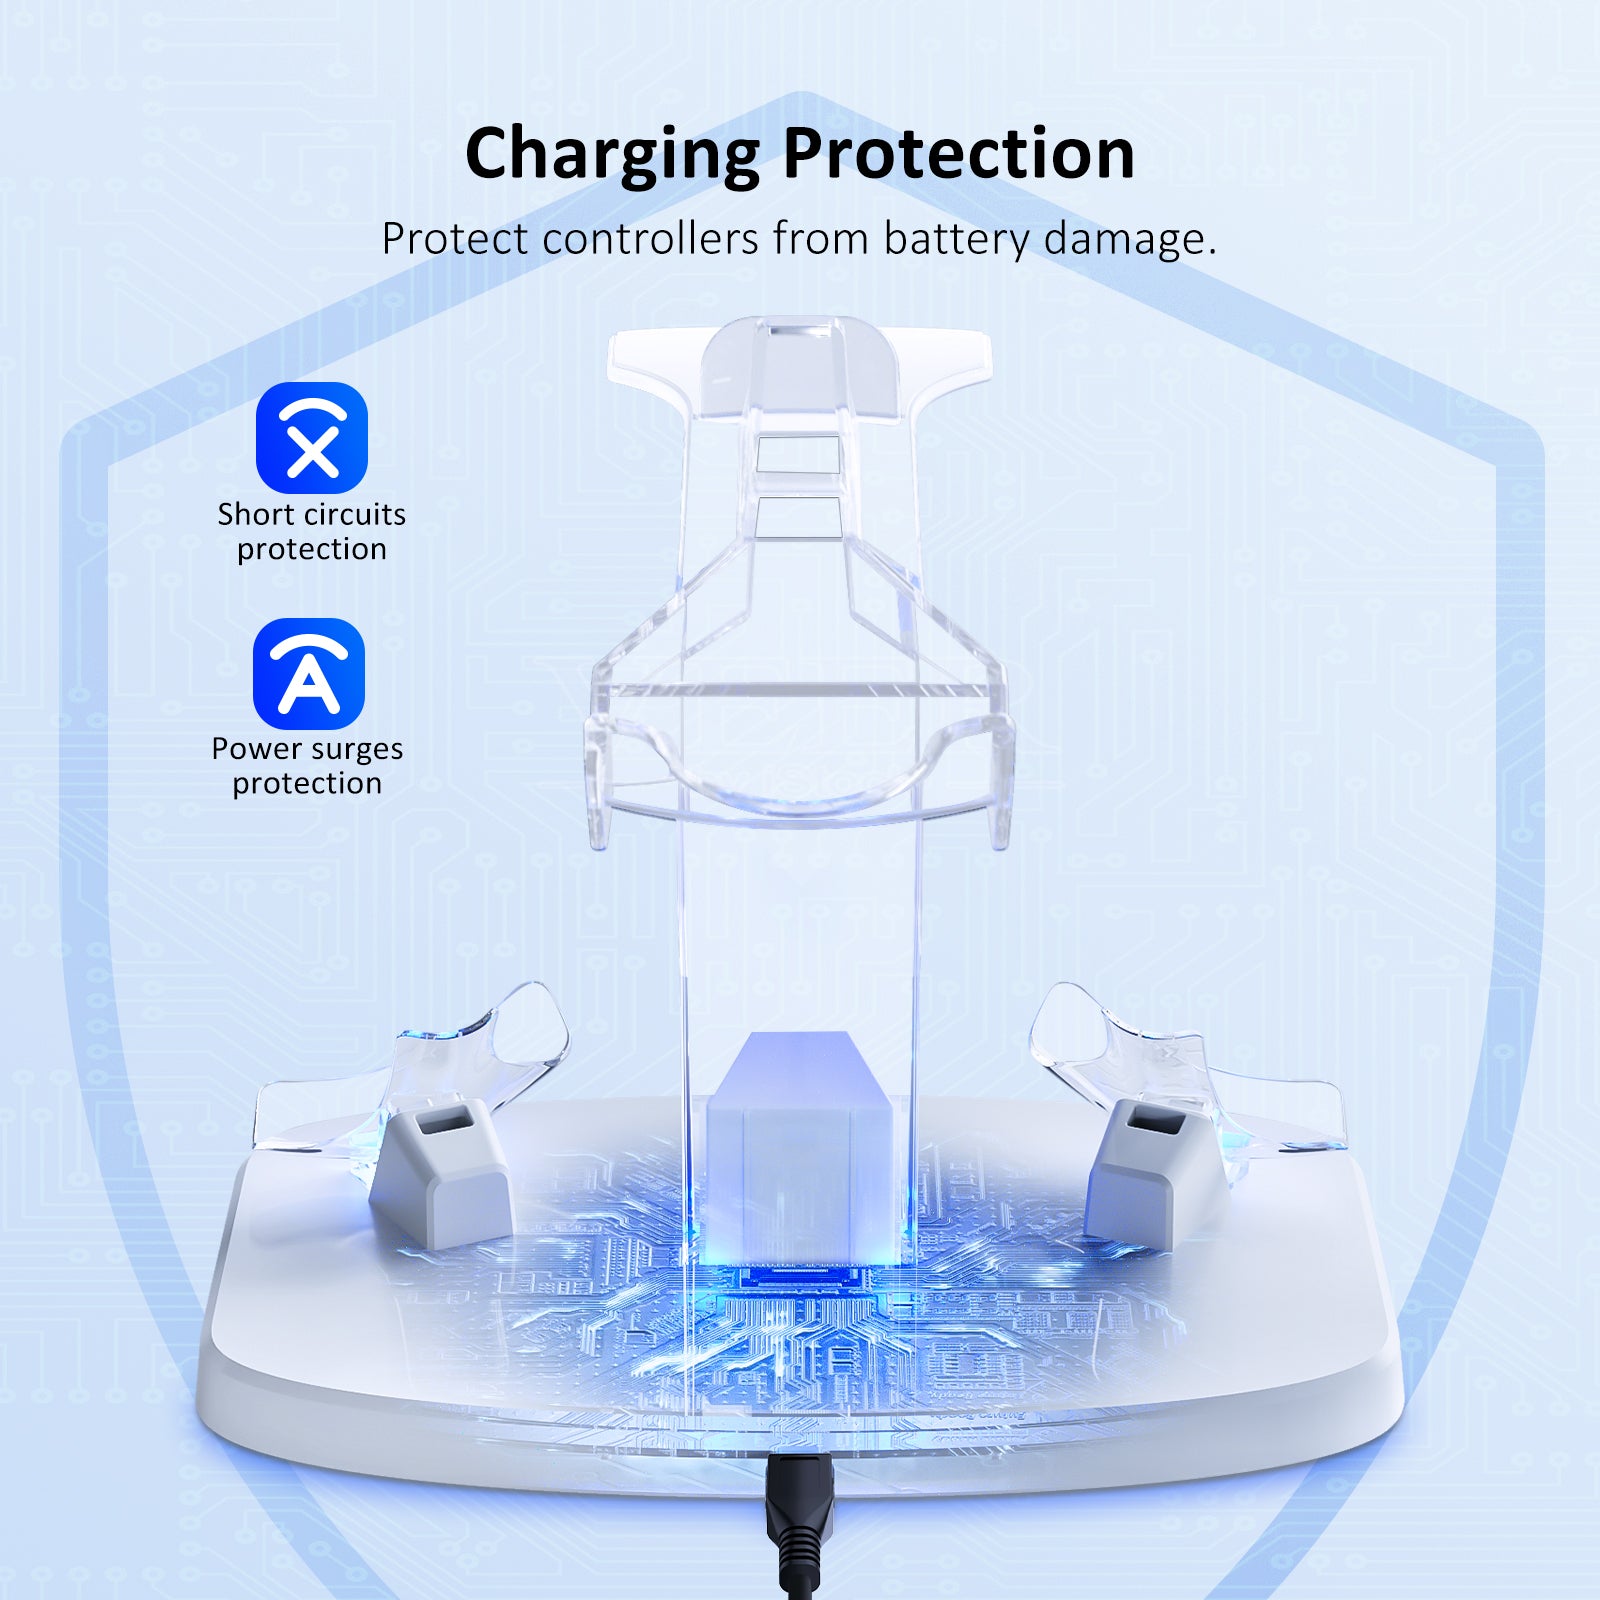 The Charging Station has protection settings to prevent short circuits and power surges